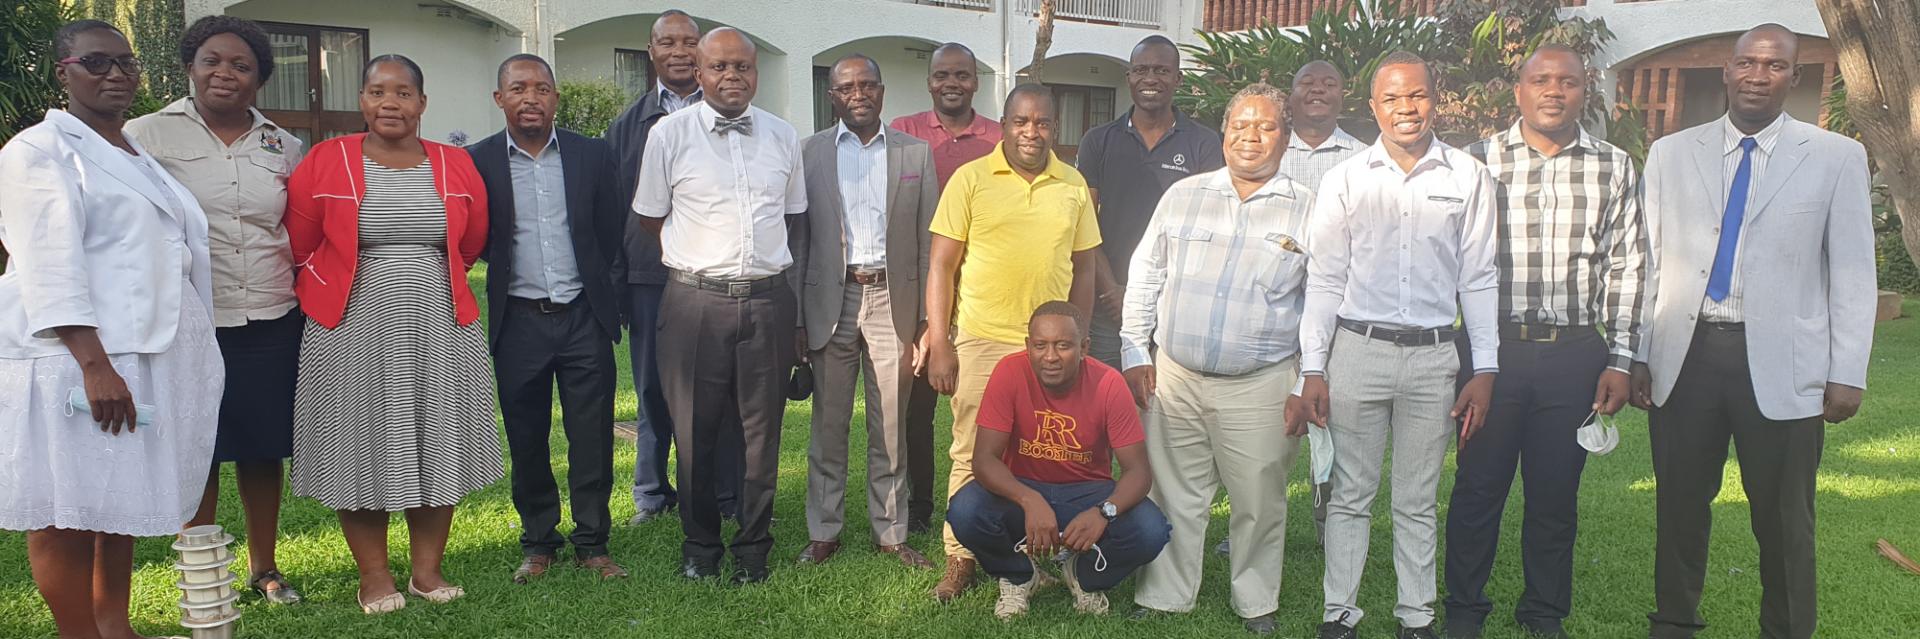 Harare embarks on a new economic resilience plan amidst the COVID-19 pandemic